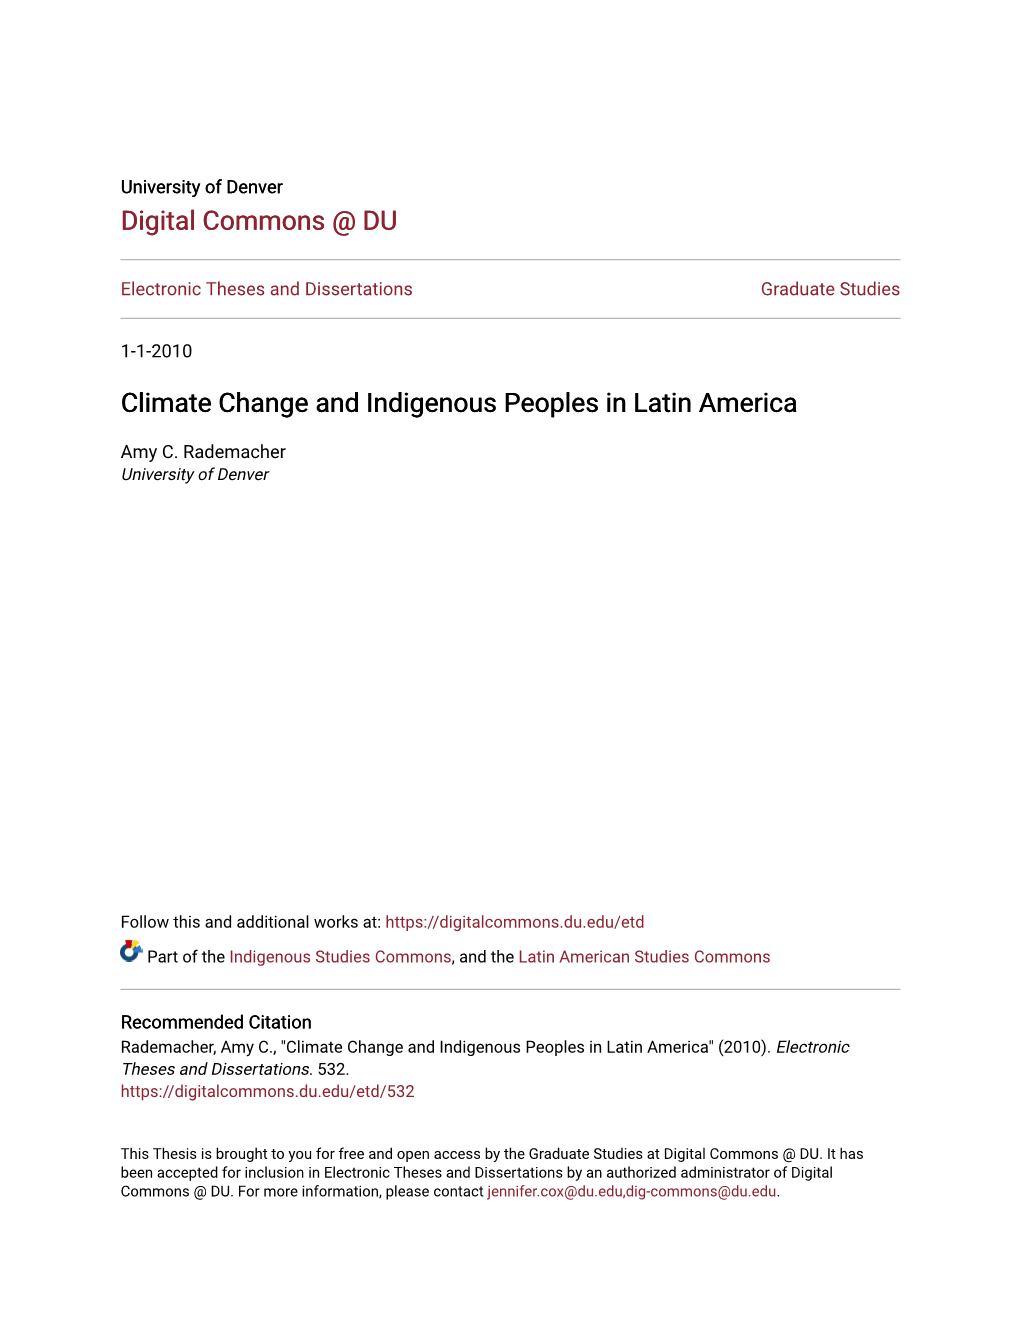 Climate Change and Indigenous Peoples in Latin America